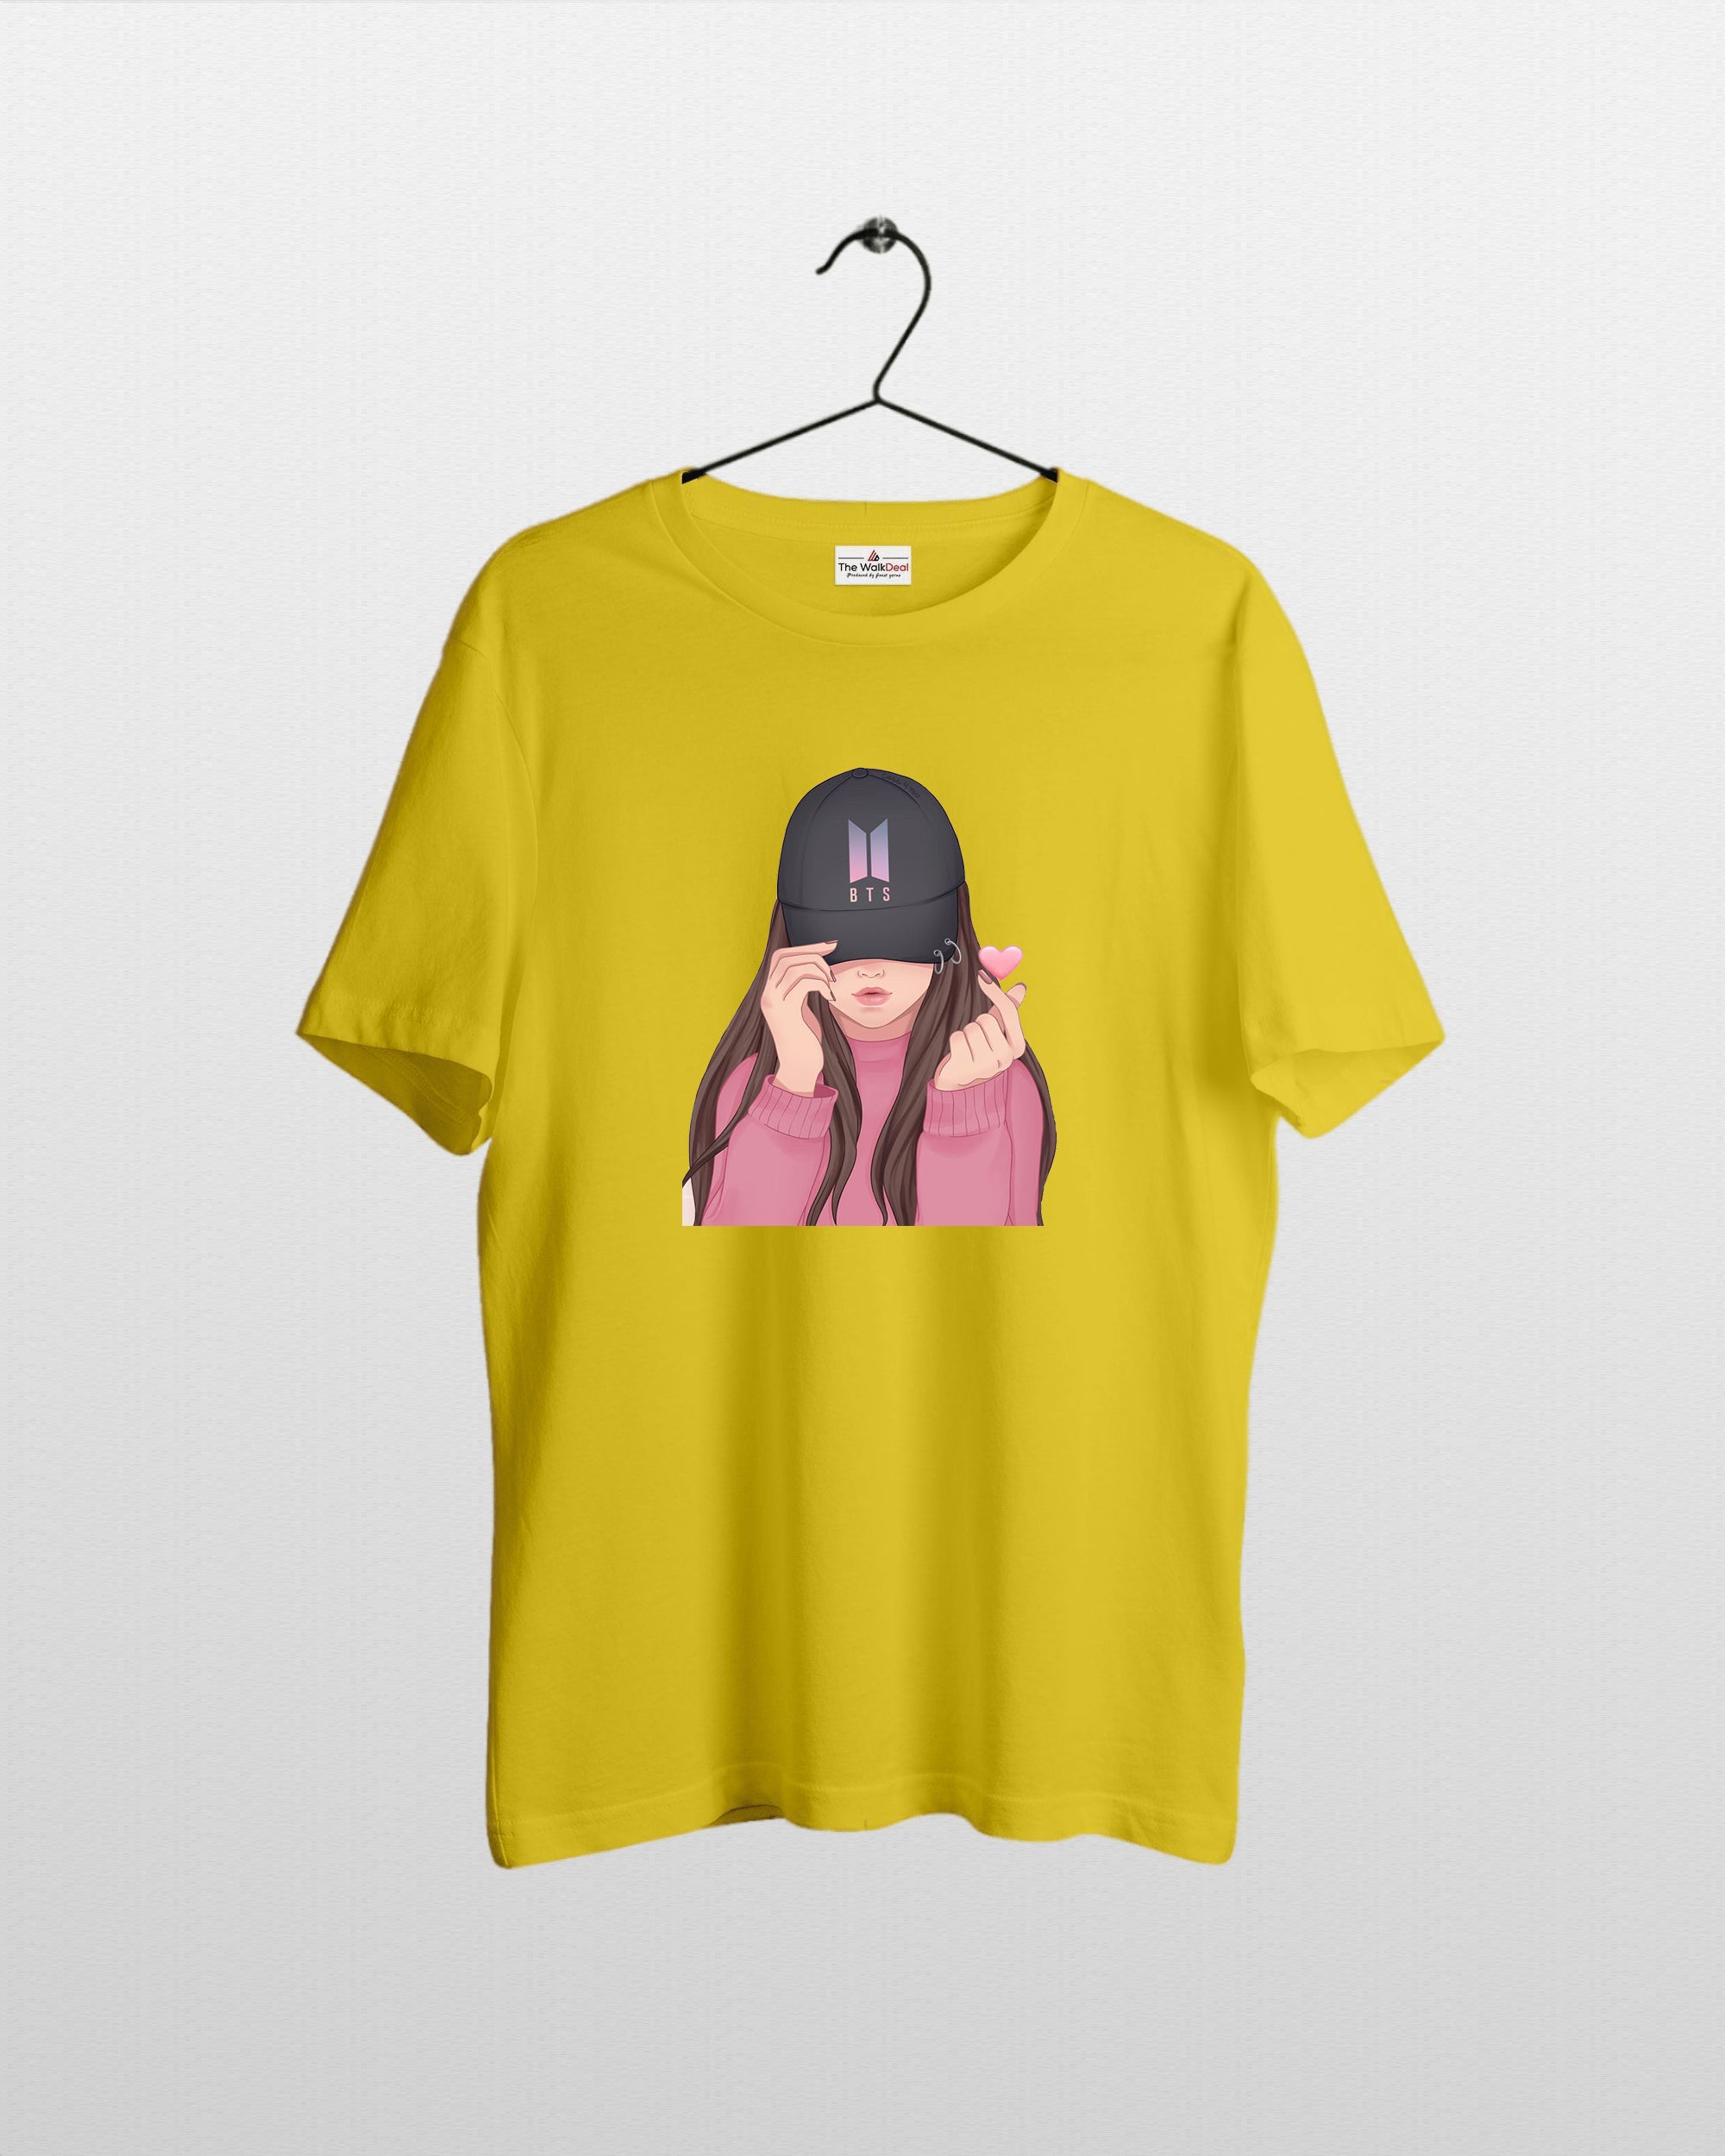 BTS T-Shirts For Men || Yellow || Stylish Tshirts || 100% Cotton || Best T-Shirt For Men's